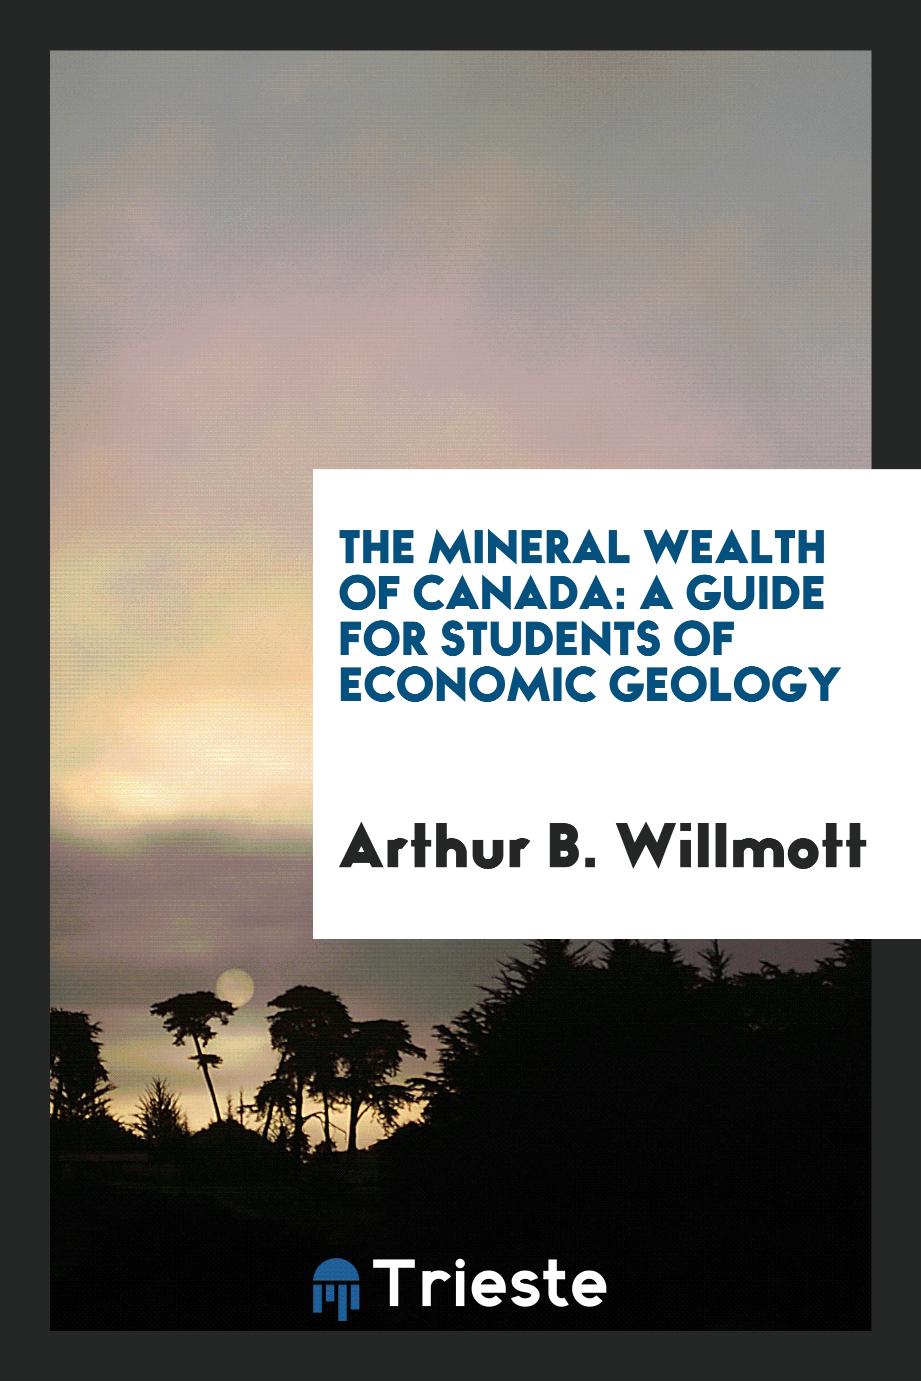 The Mineral Wealth of Canada: A Guide for Students of Economic Geology